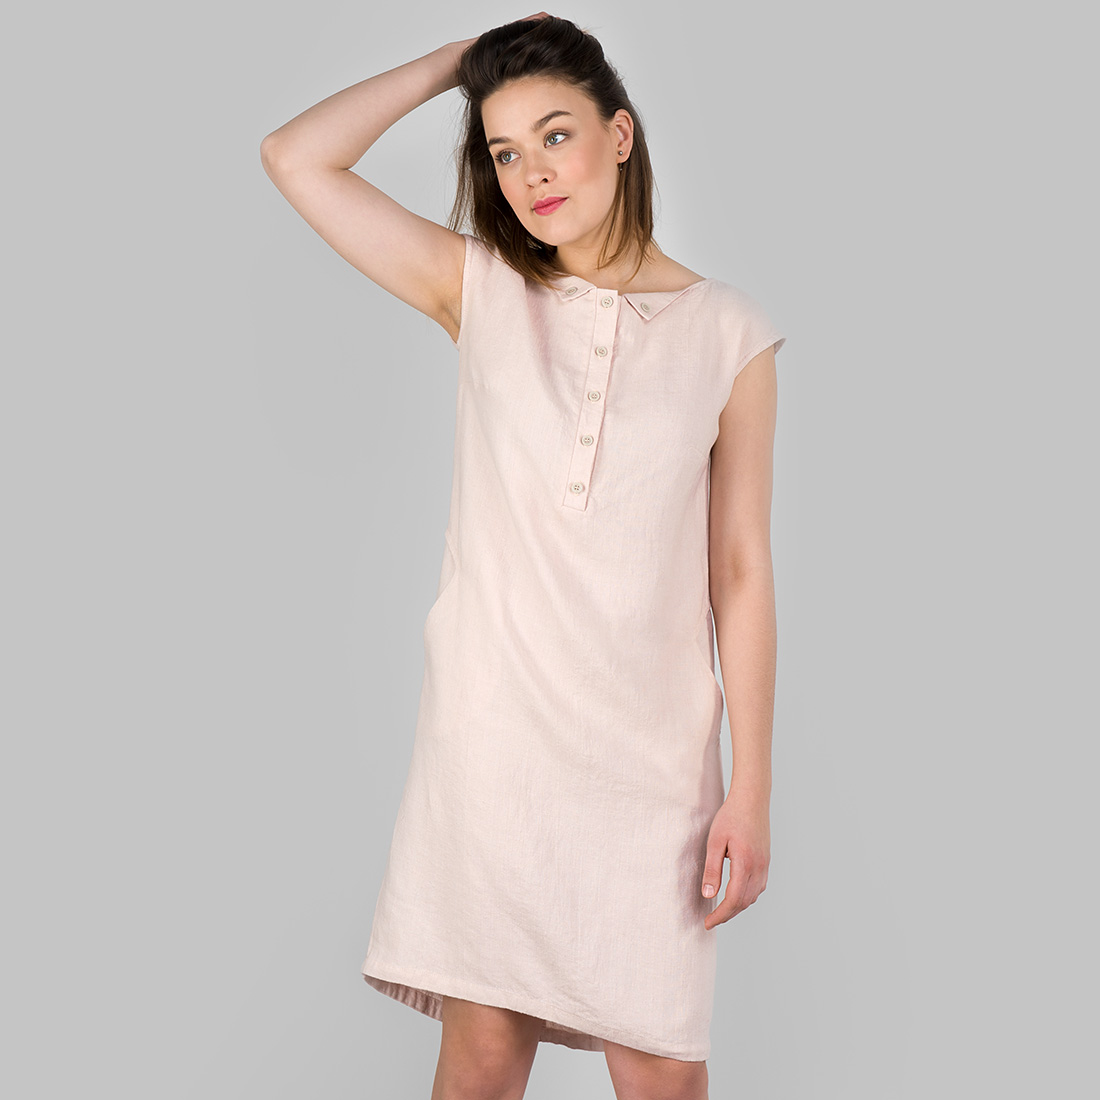 Linen dress in light rose color, short, with buttons. Manufacturer: AB “Siulas”. Produced in Lithuania